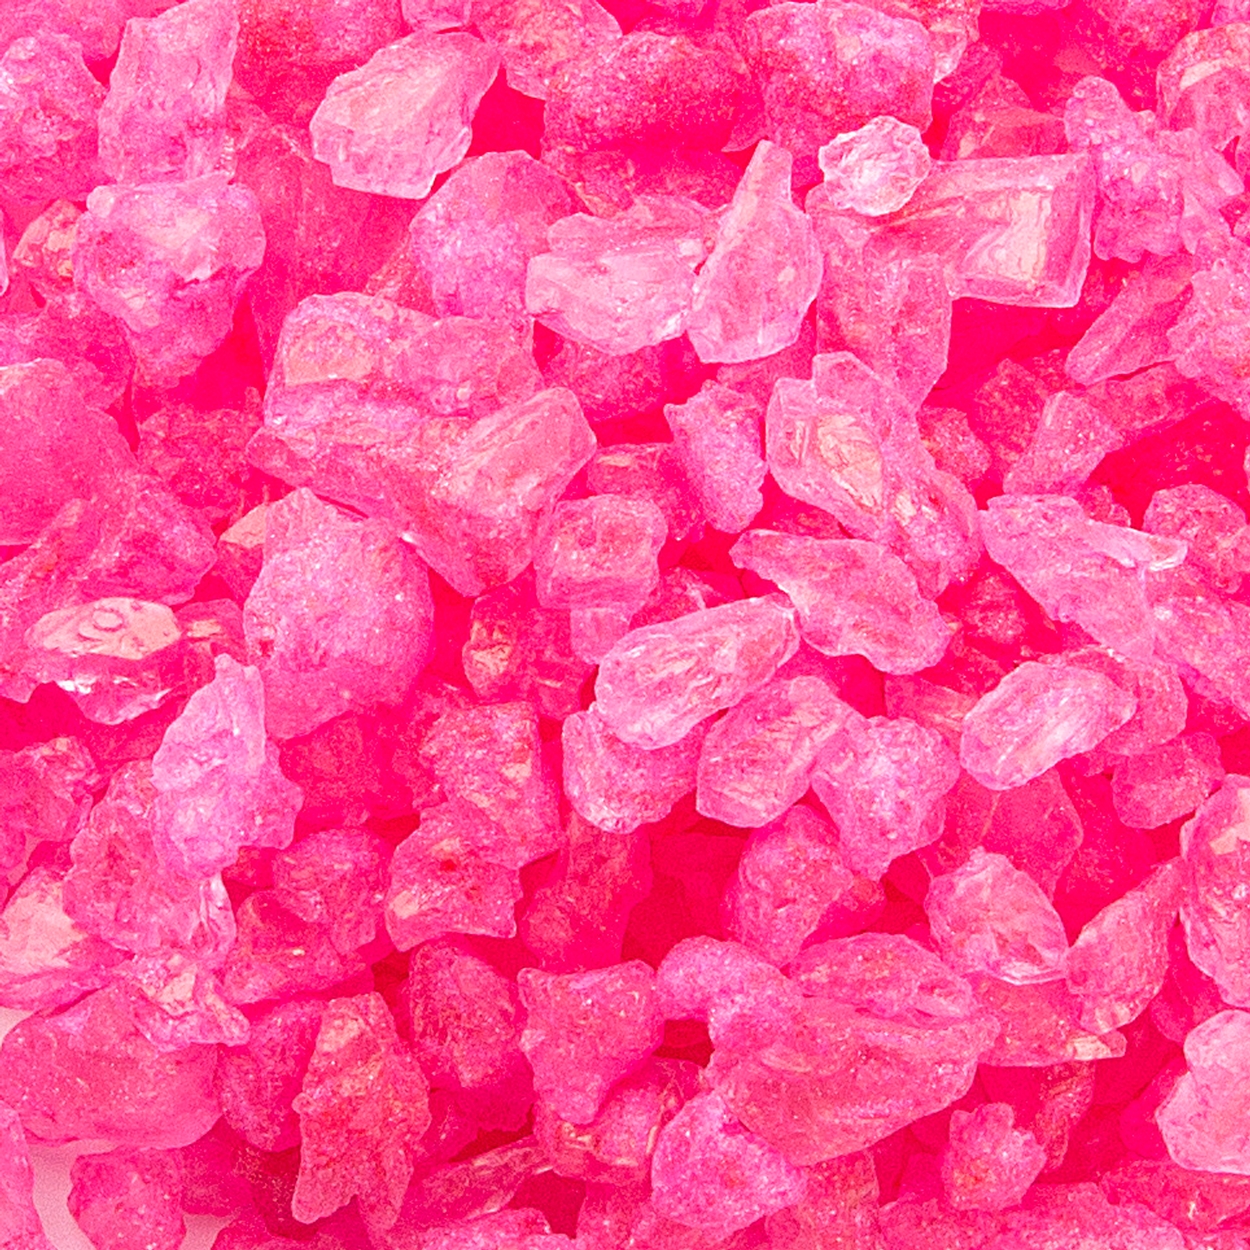 Pink Rock Candy Crystals - Cherry • Rock Candy & Sugar Swizzle Sticks ...